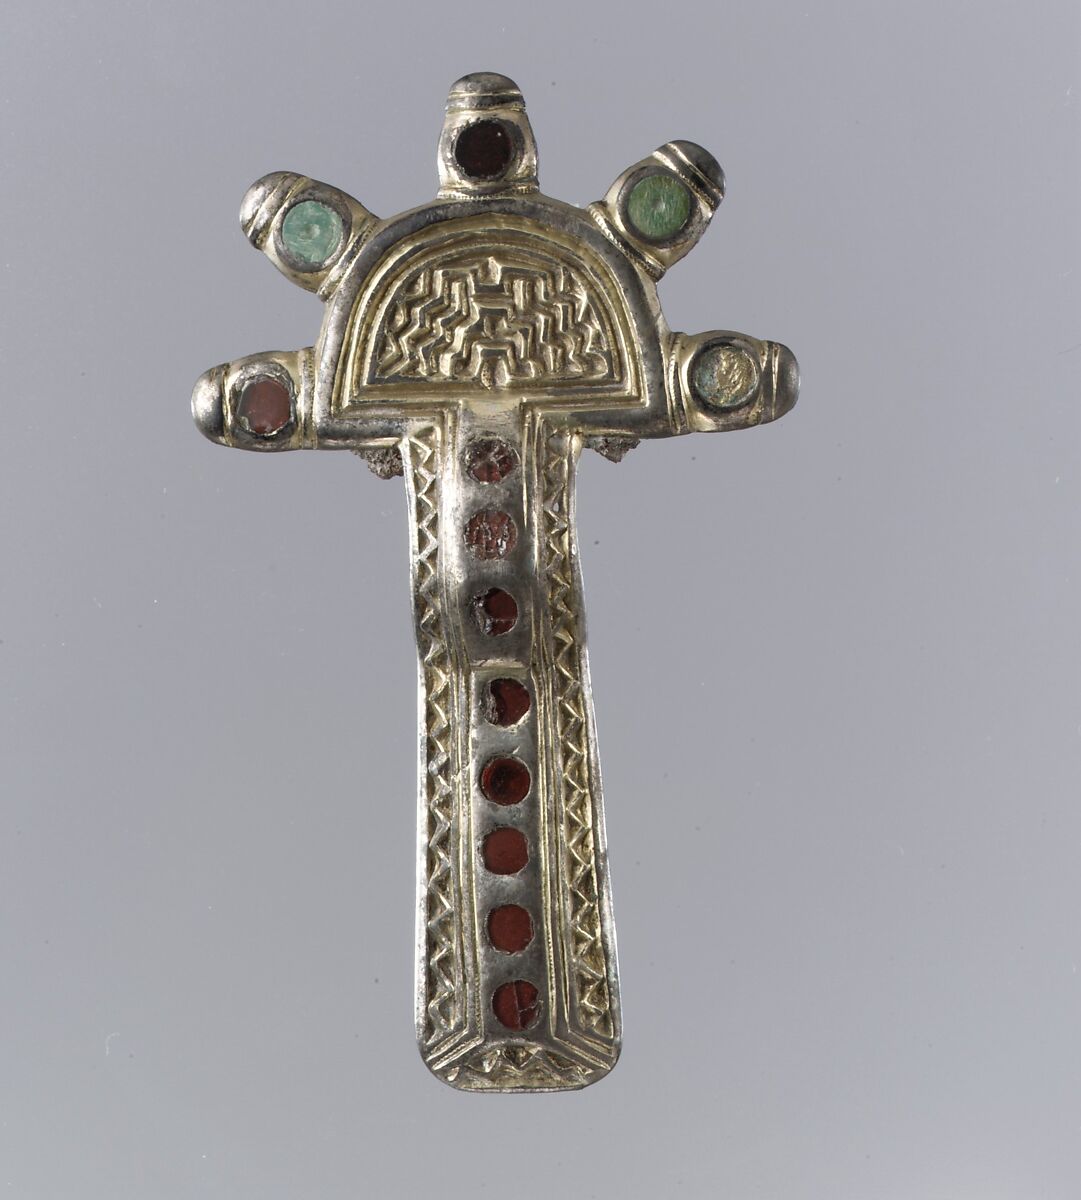 Bow Brooch, Silver, gilt and cast; garnet with unpatterned foil backing; bone; iron spring/pin, Frankish 